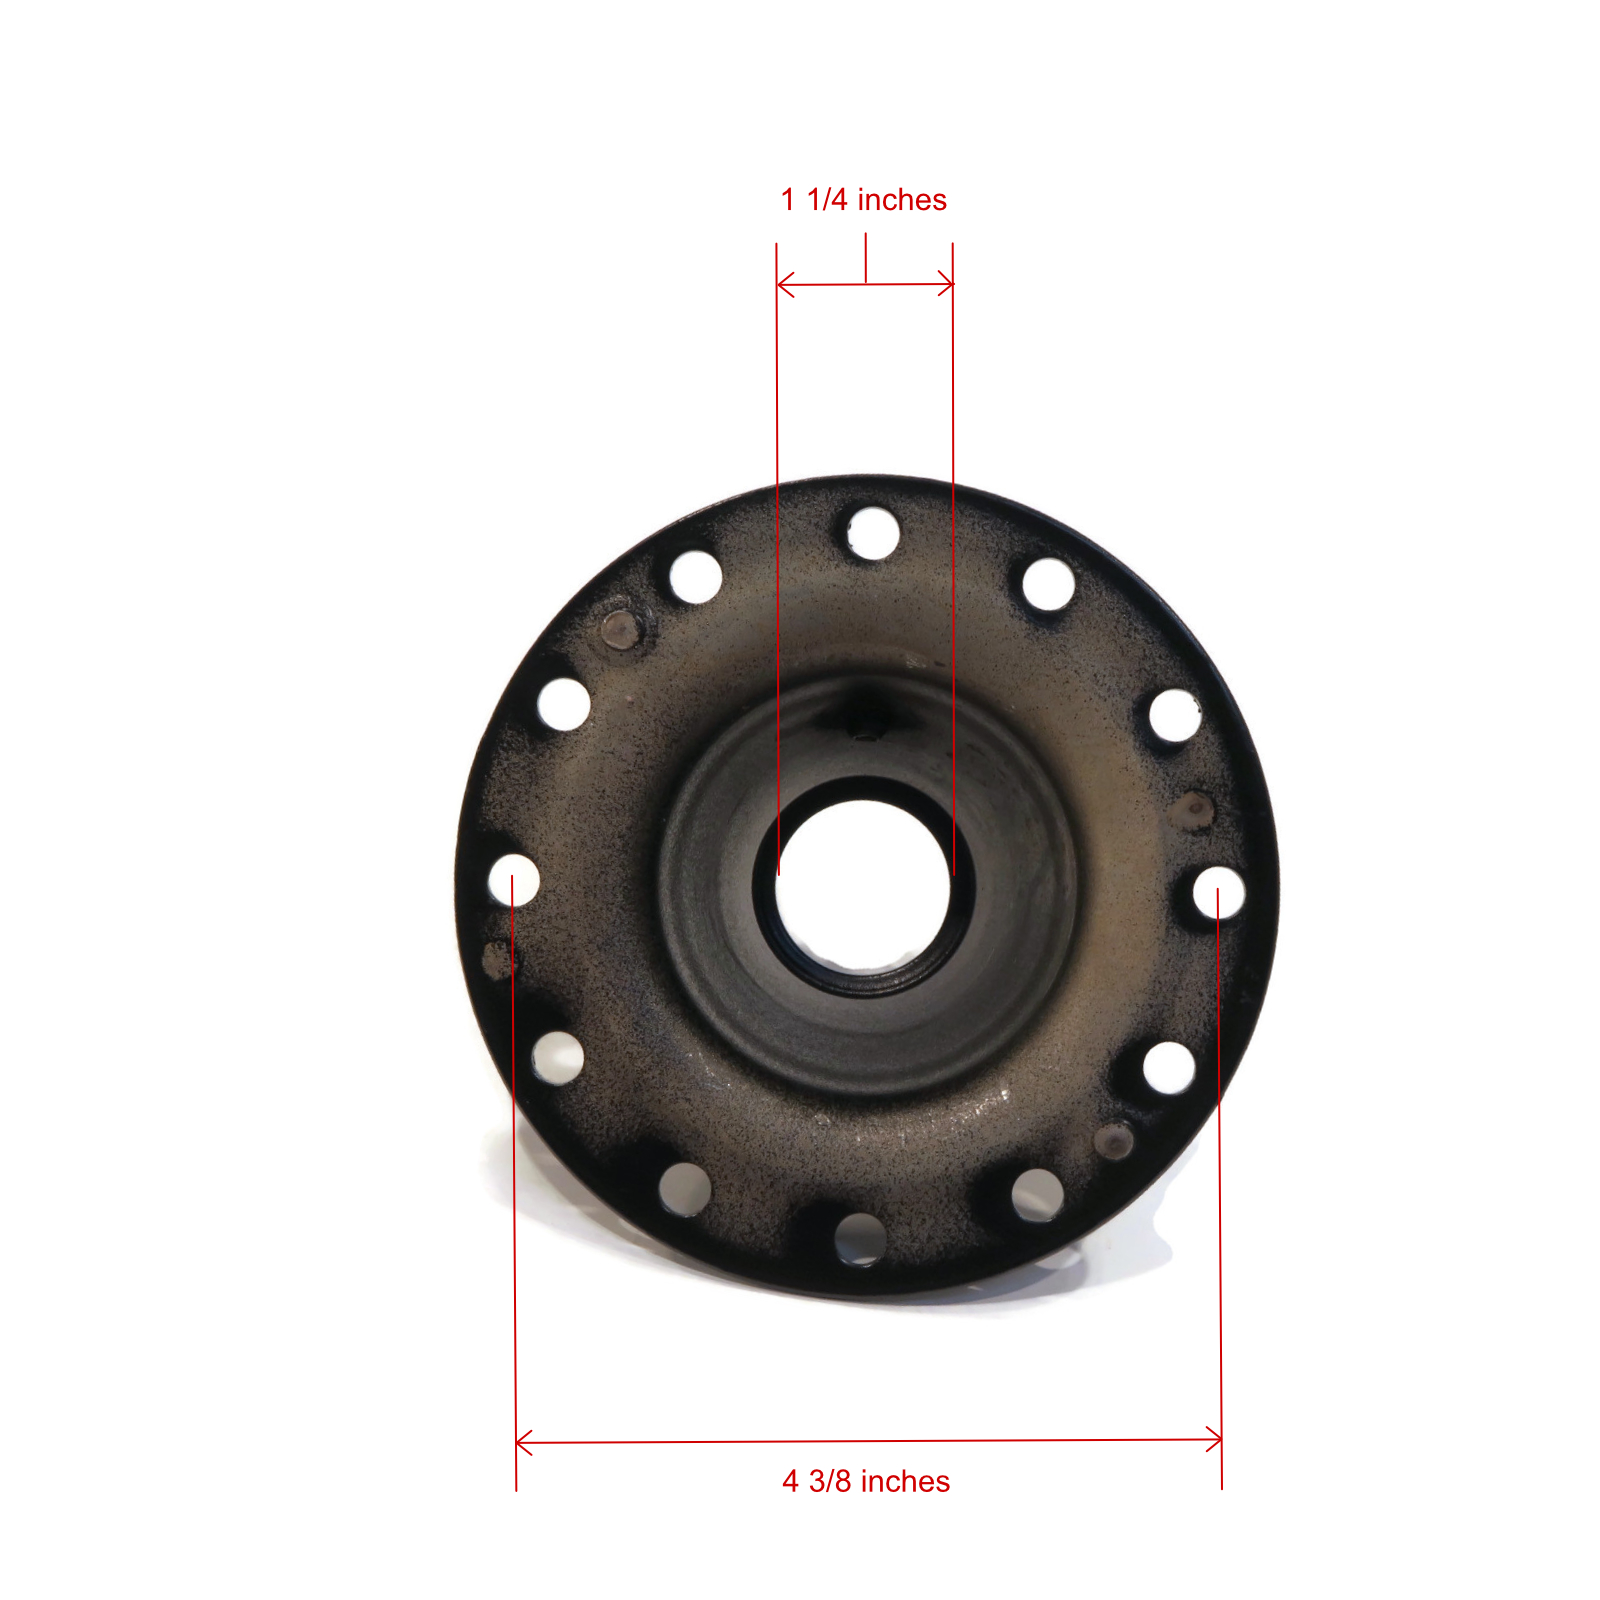 The ROP Shop | Genuine Simplicity Spindle Housing Arbor Bottom 1695404 1695406 1695414 1695424 - image 2 of 6